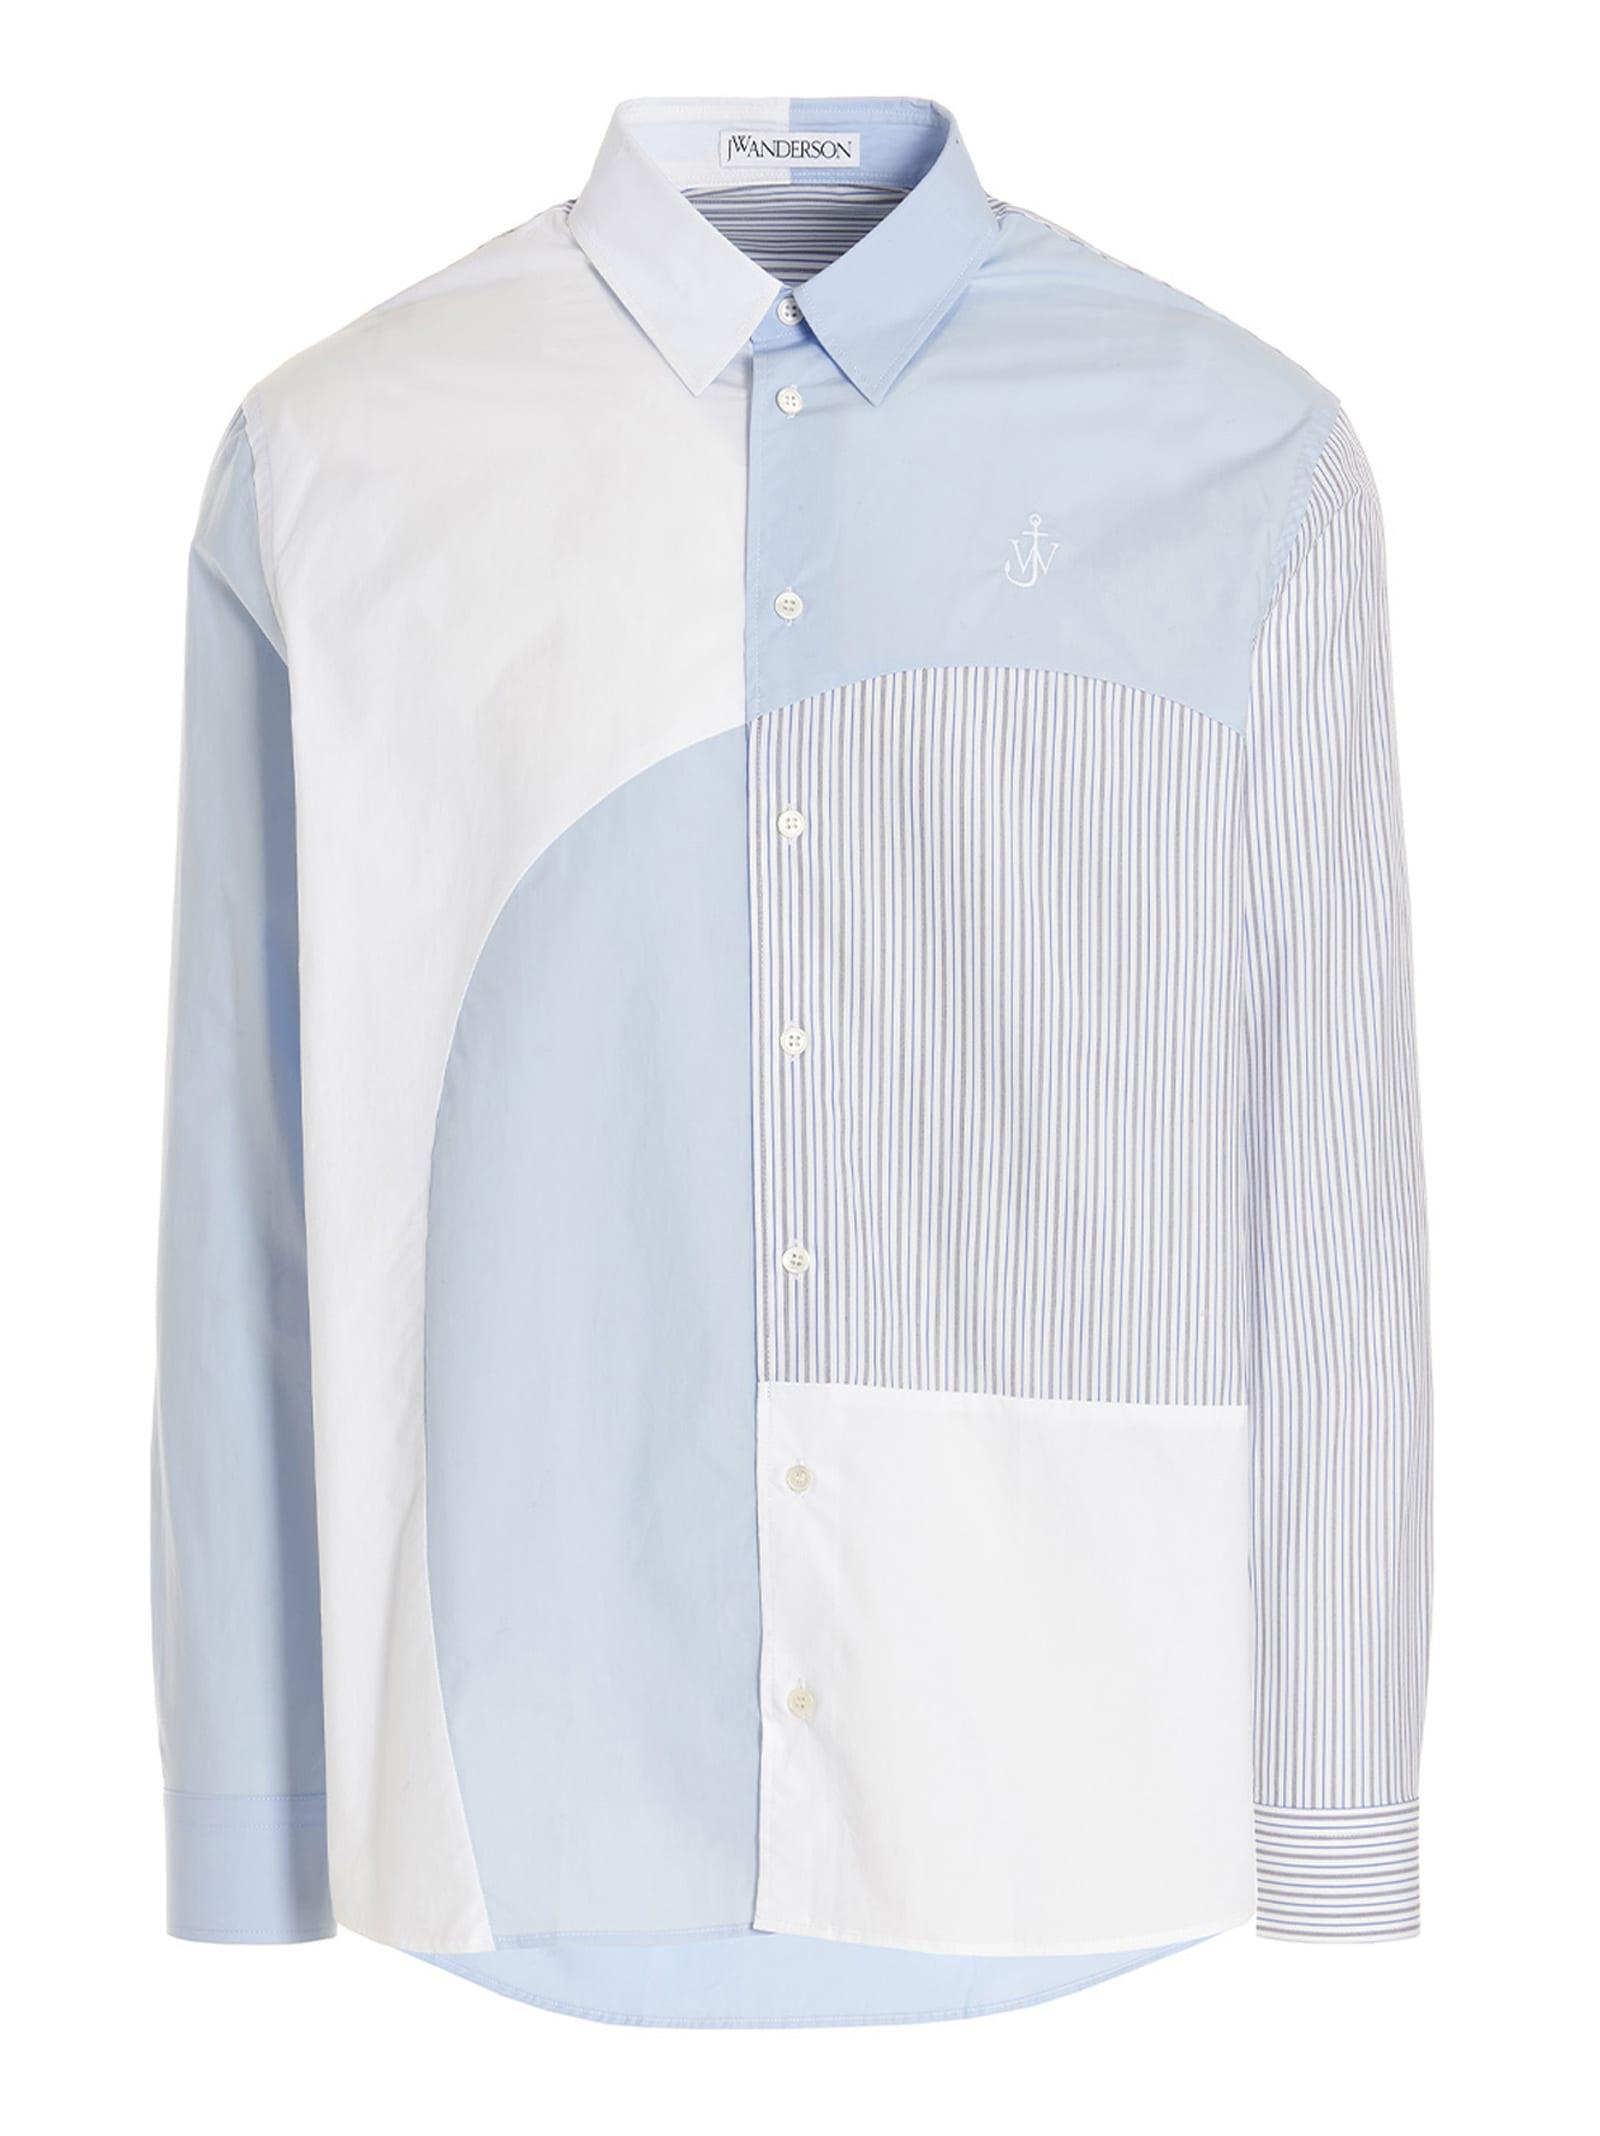 JW Anderson Patchwork Shirt in Blue for Men | Lyst